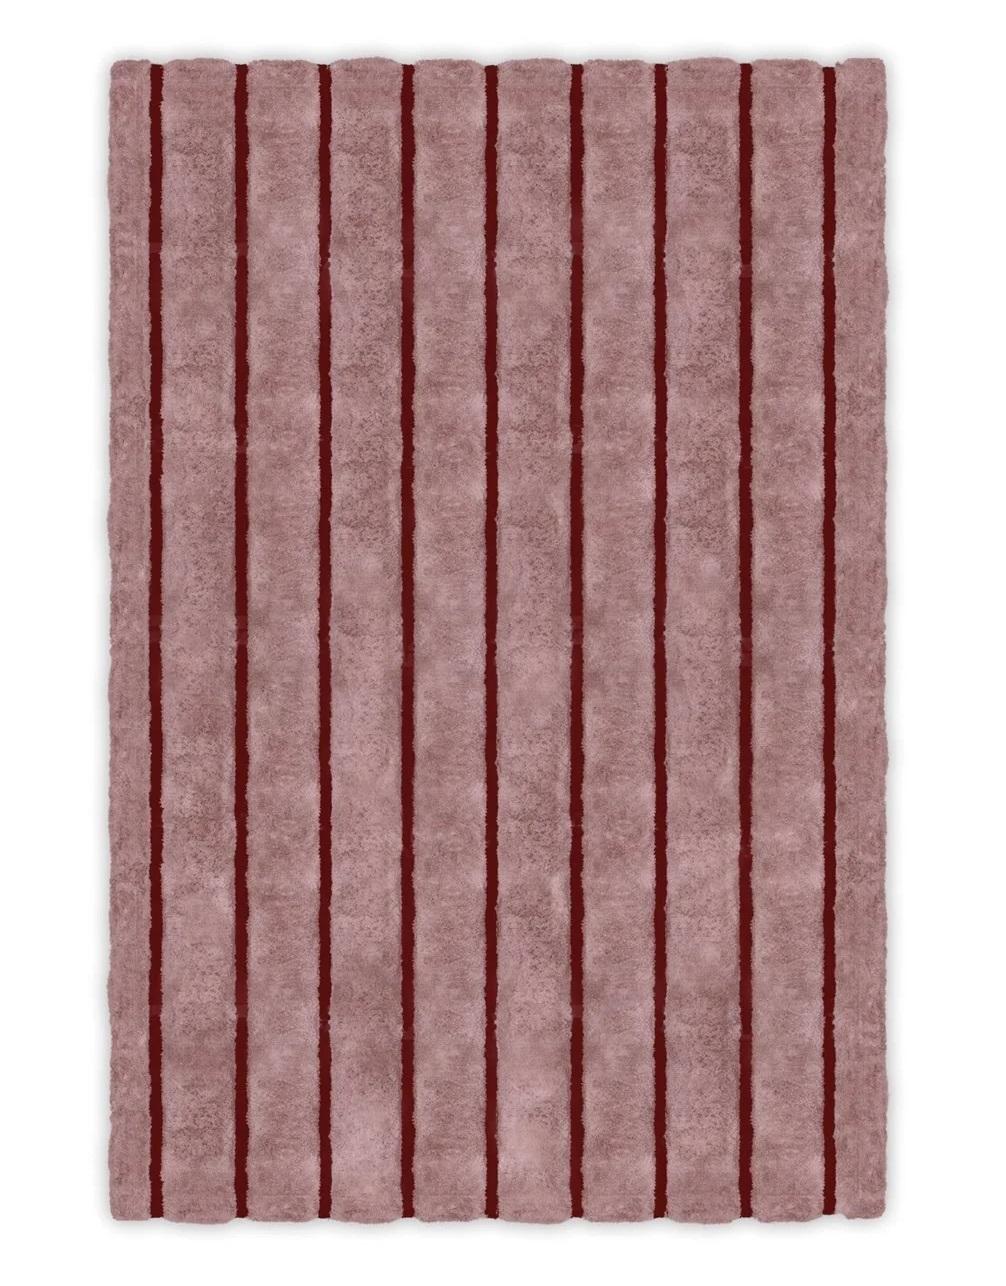 Pink ever rug by Paolo Stella.
Dimensions: D 200 x W 300cm (Pile heigh: 1.2 - 3 cm)
Materials: Viscose, linen
Available in other color.

“My first memory of a rug is Aladdin’s flying carpet magically helping you to fulfill you dreams.
The day